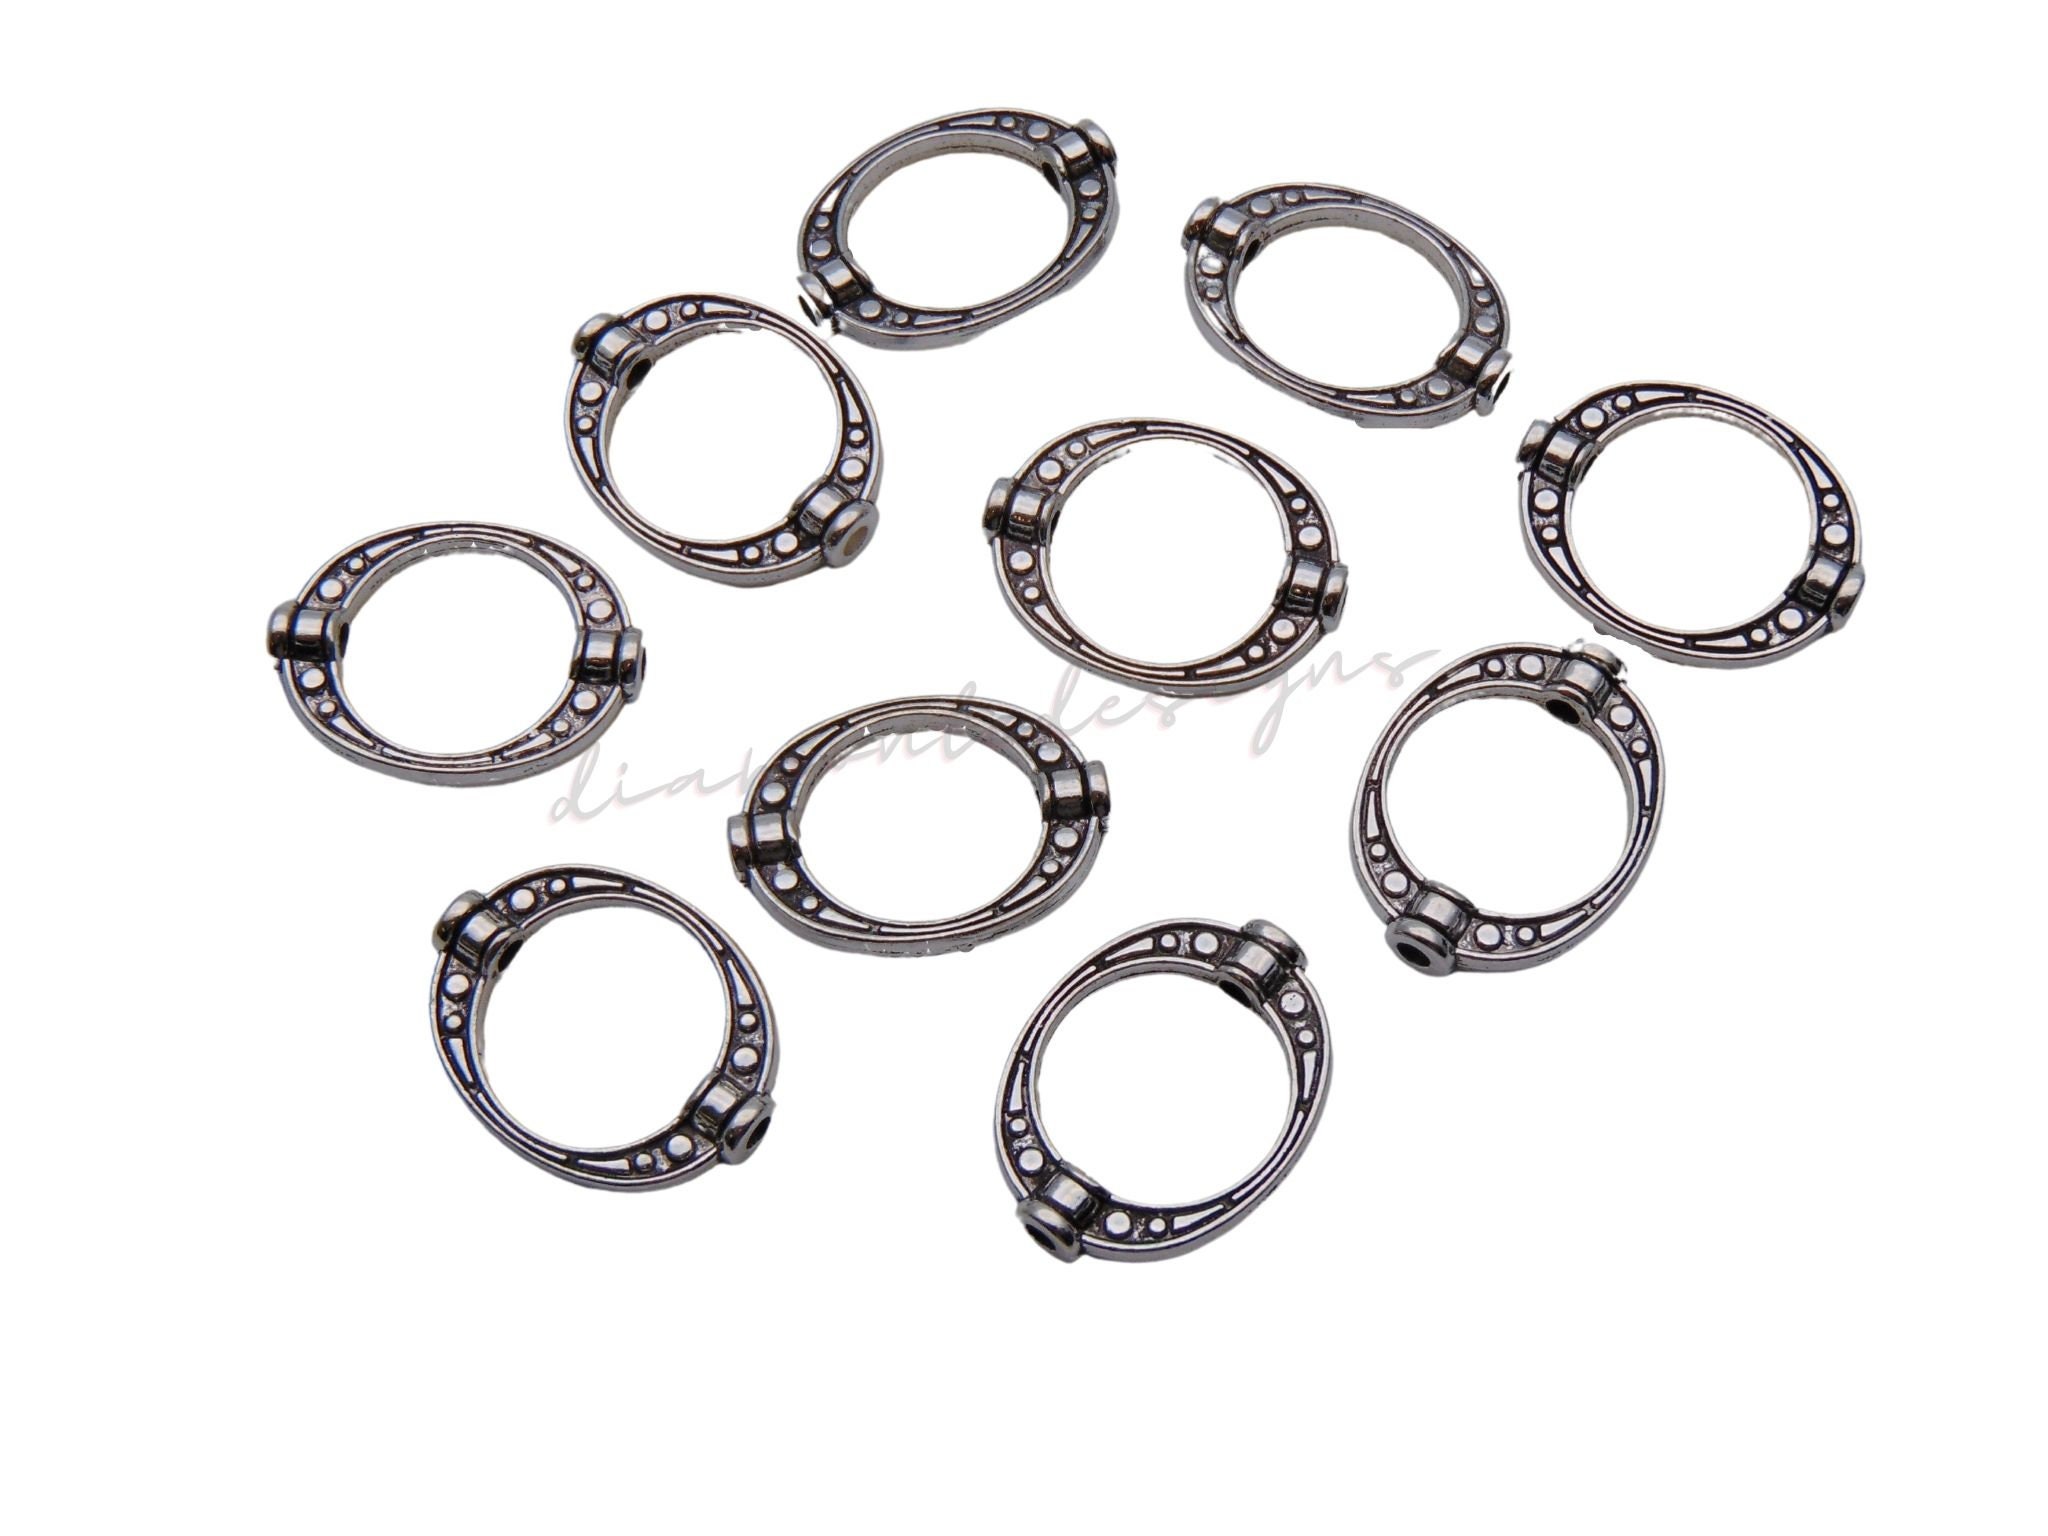 6 Pc, Silver Tube Spacers, Licorice Sliders, Licorice Spacers, Bracelet  Spacers, Bracelet Findings, Oval Spacers, Licorice Leather Findings 